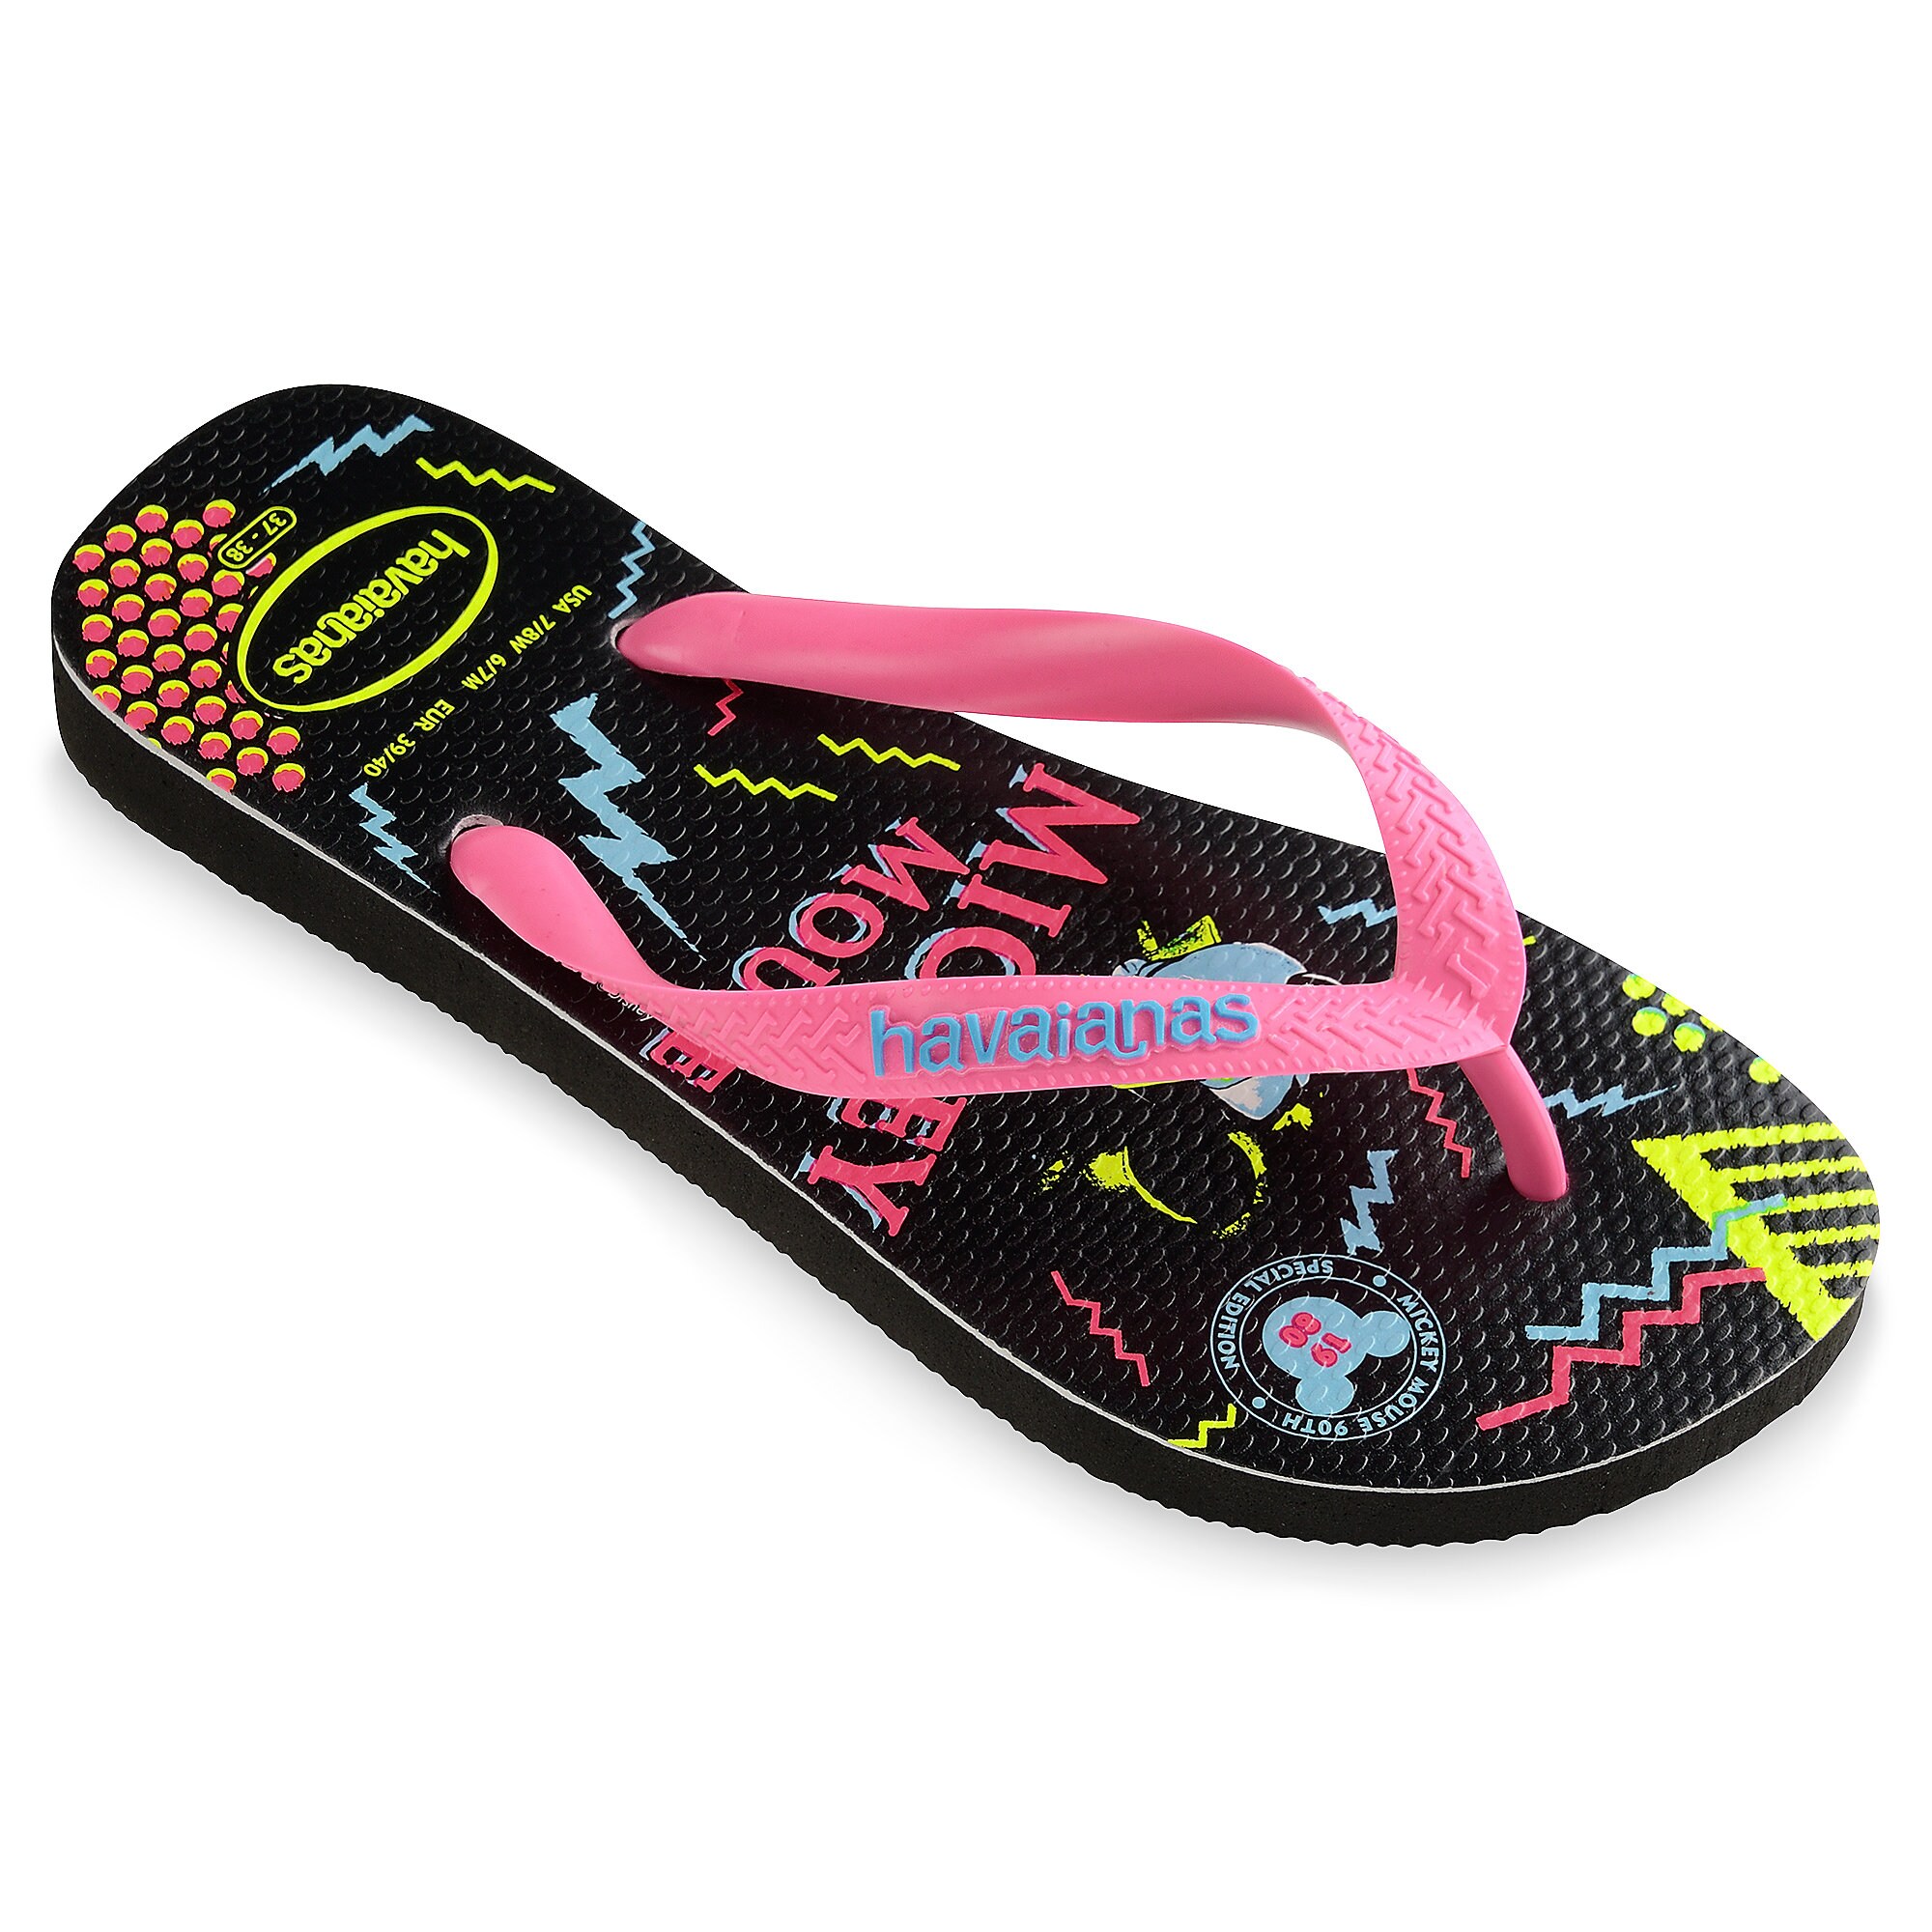 Mickey Mouse Neon Flip Flops for Adults by Havaianas - 1980s